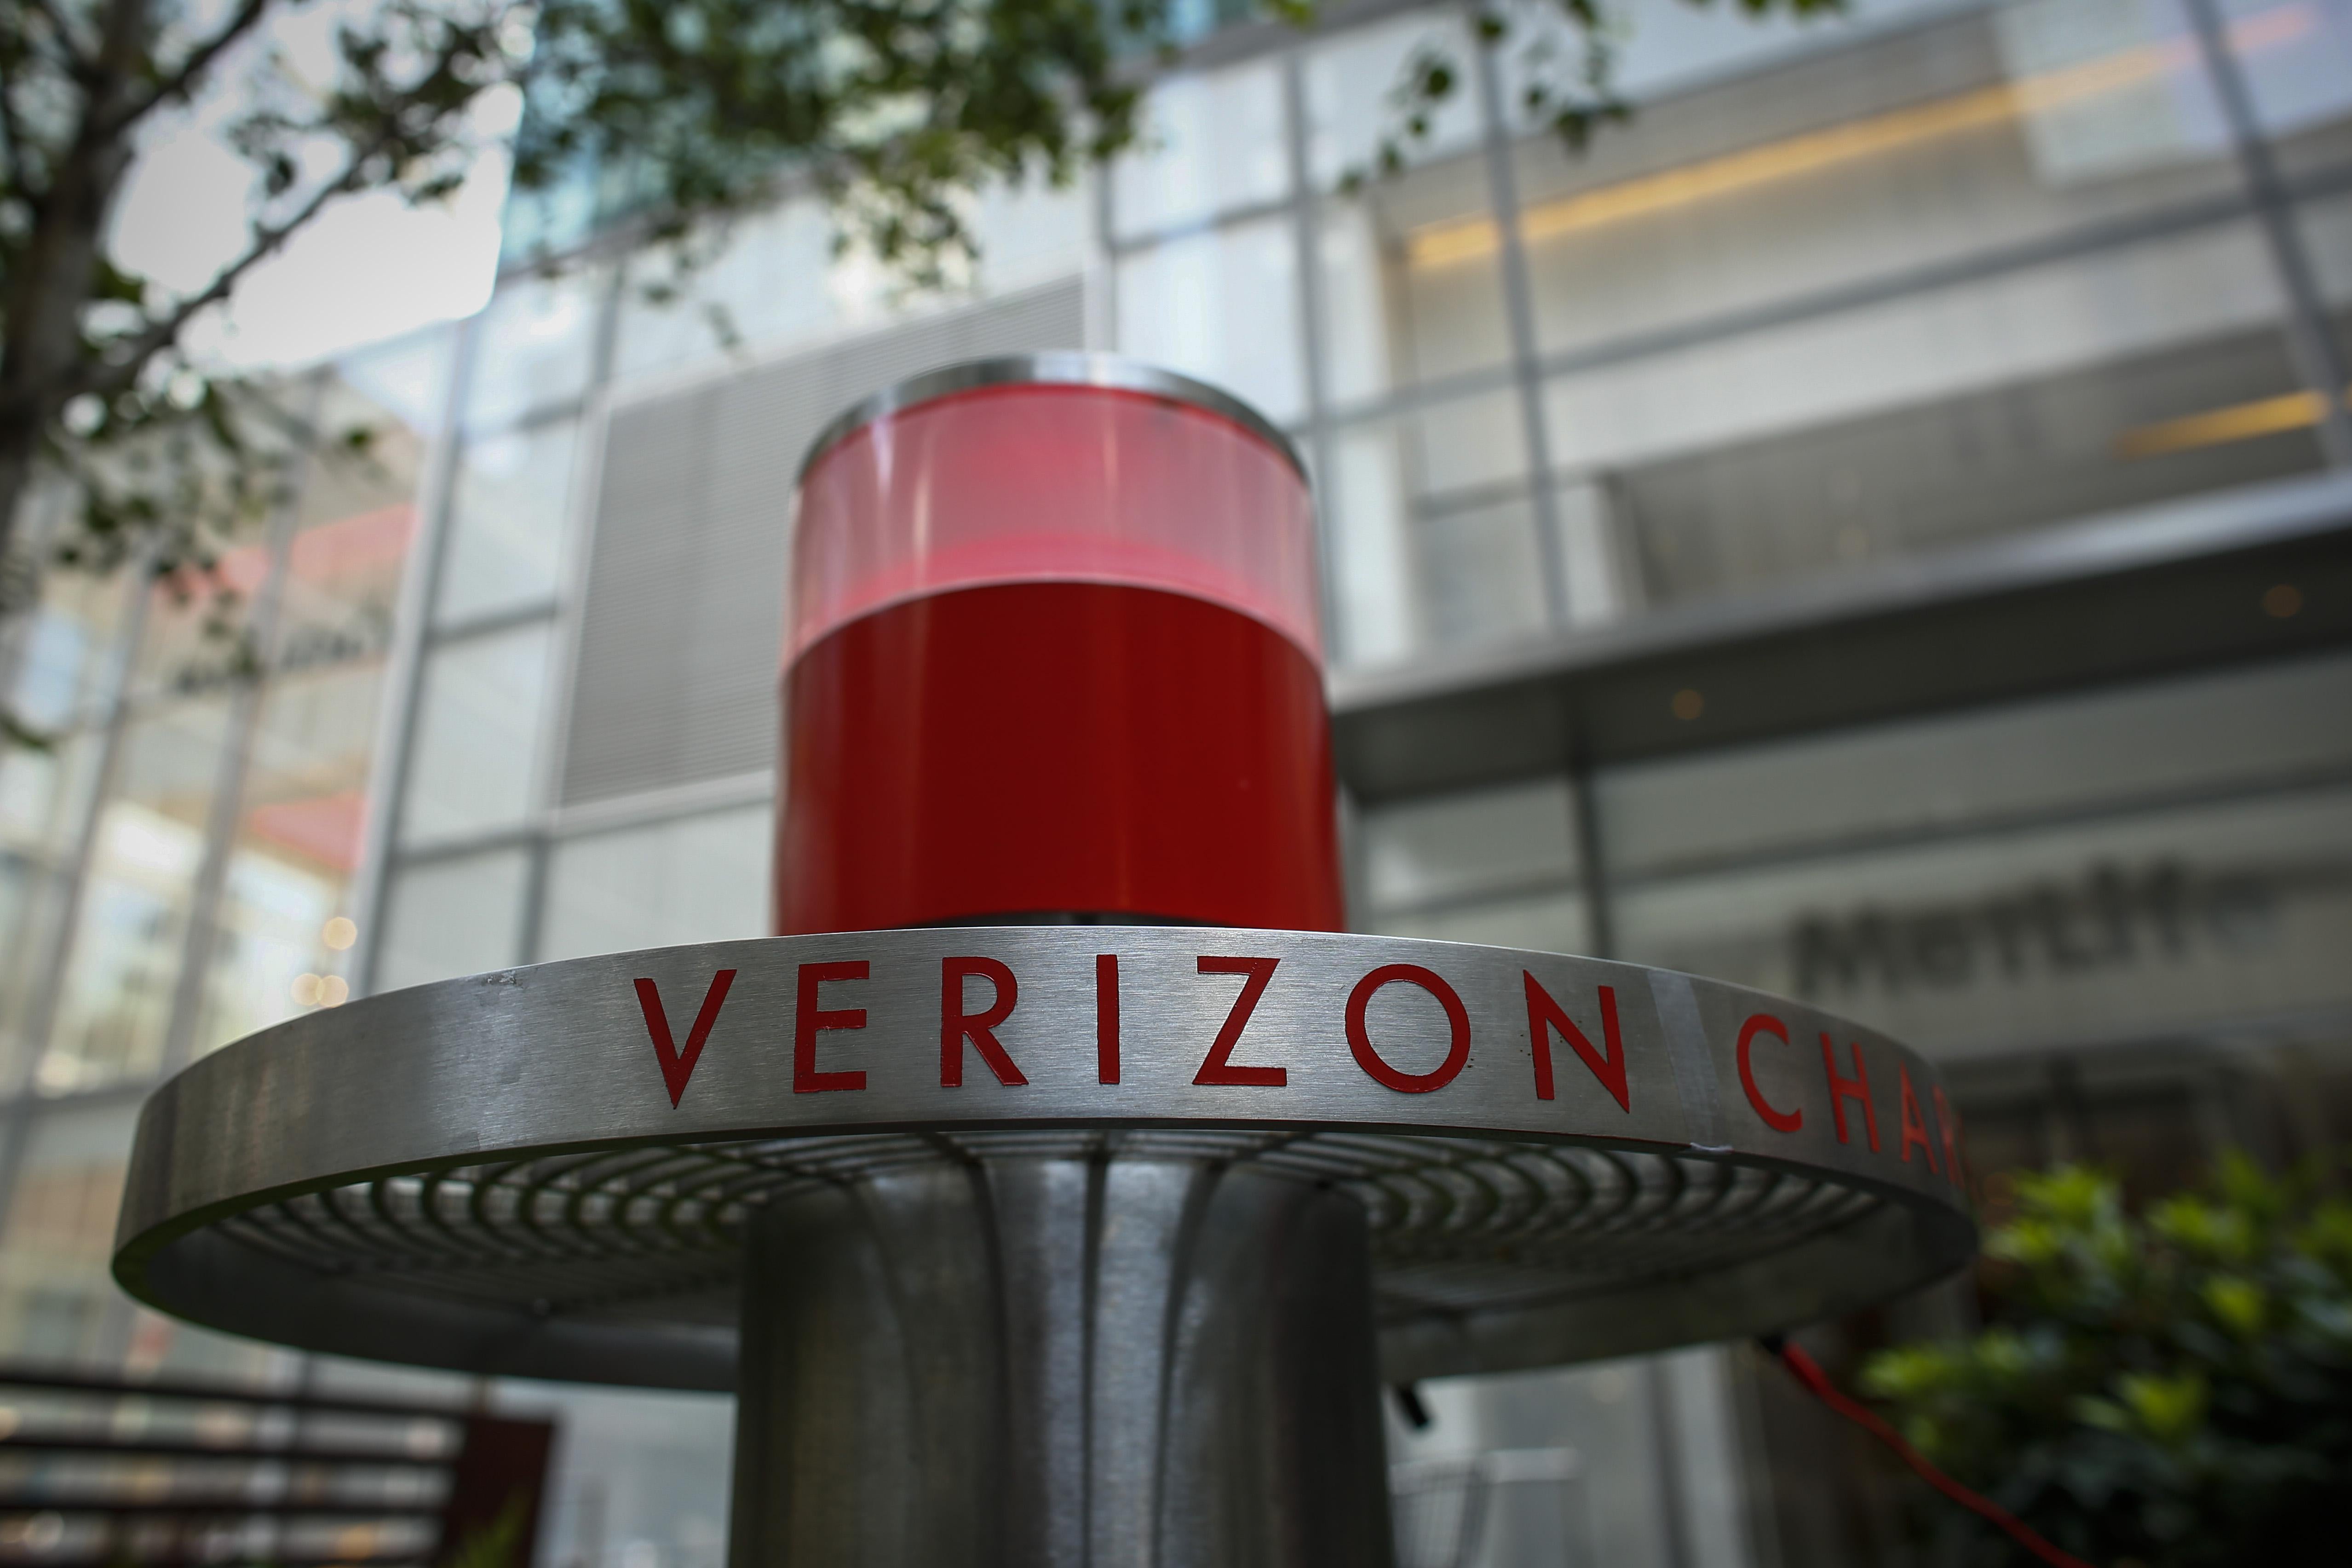 A charging station outside Verizon's headquarters.